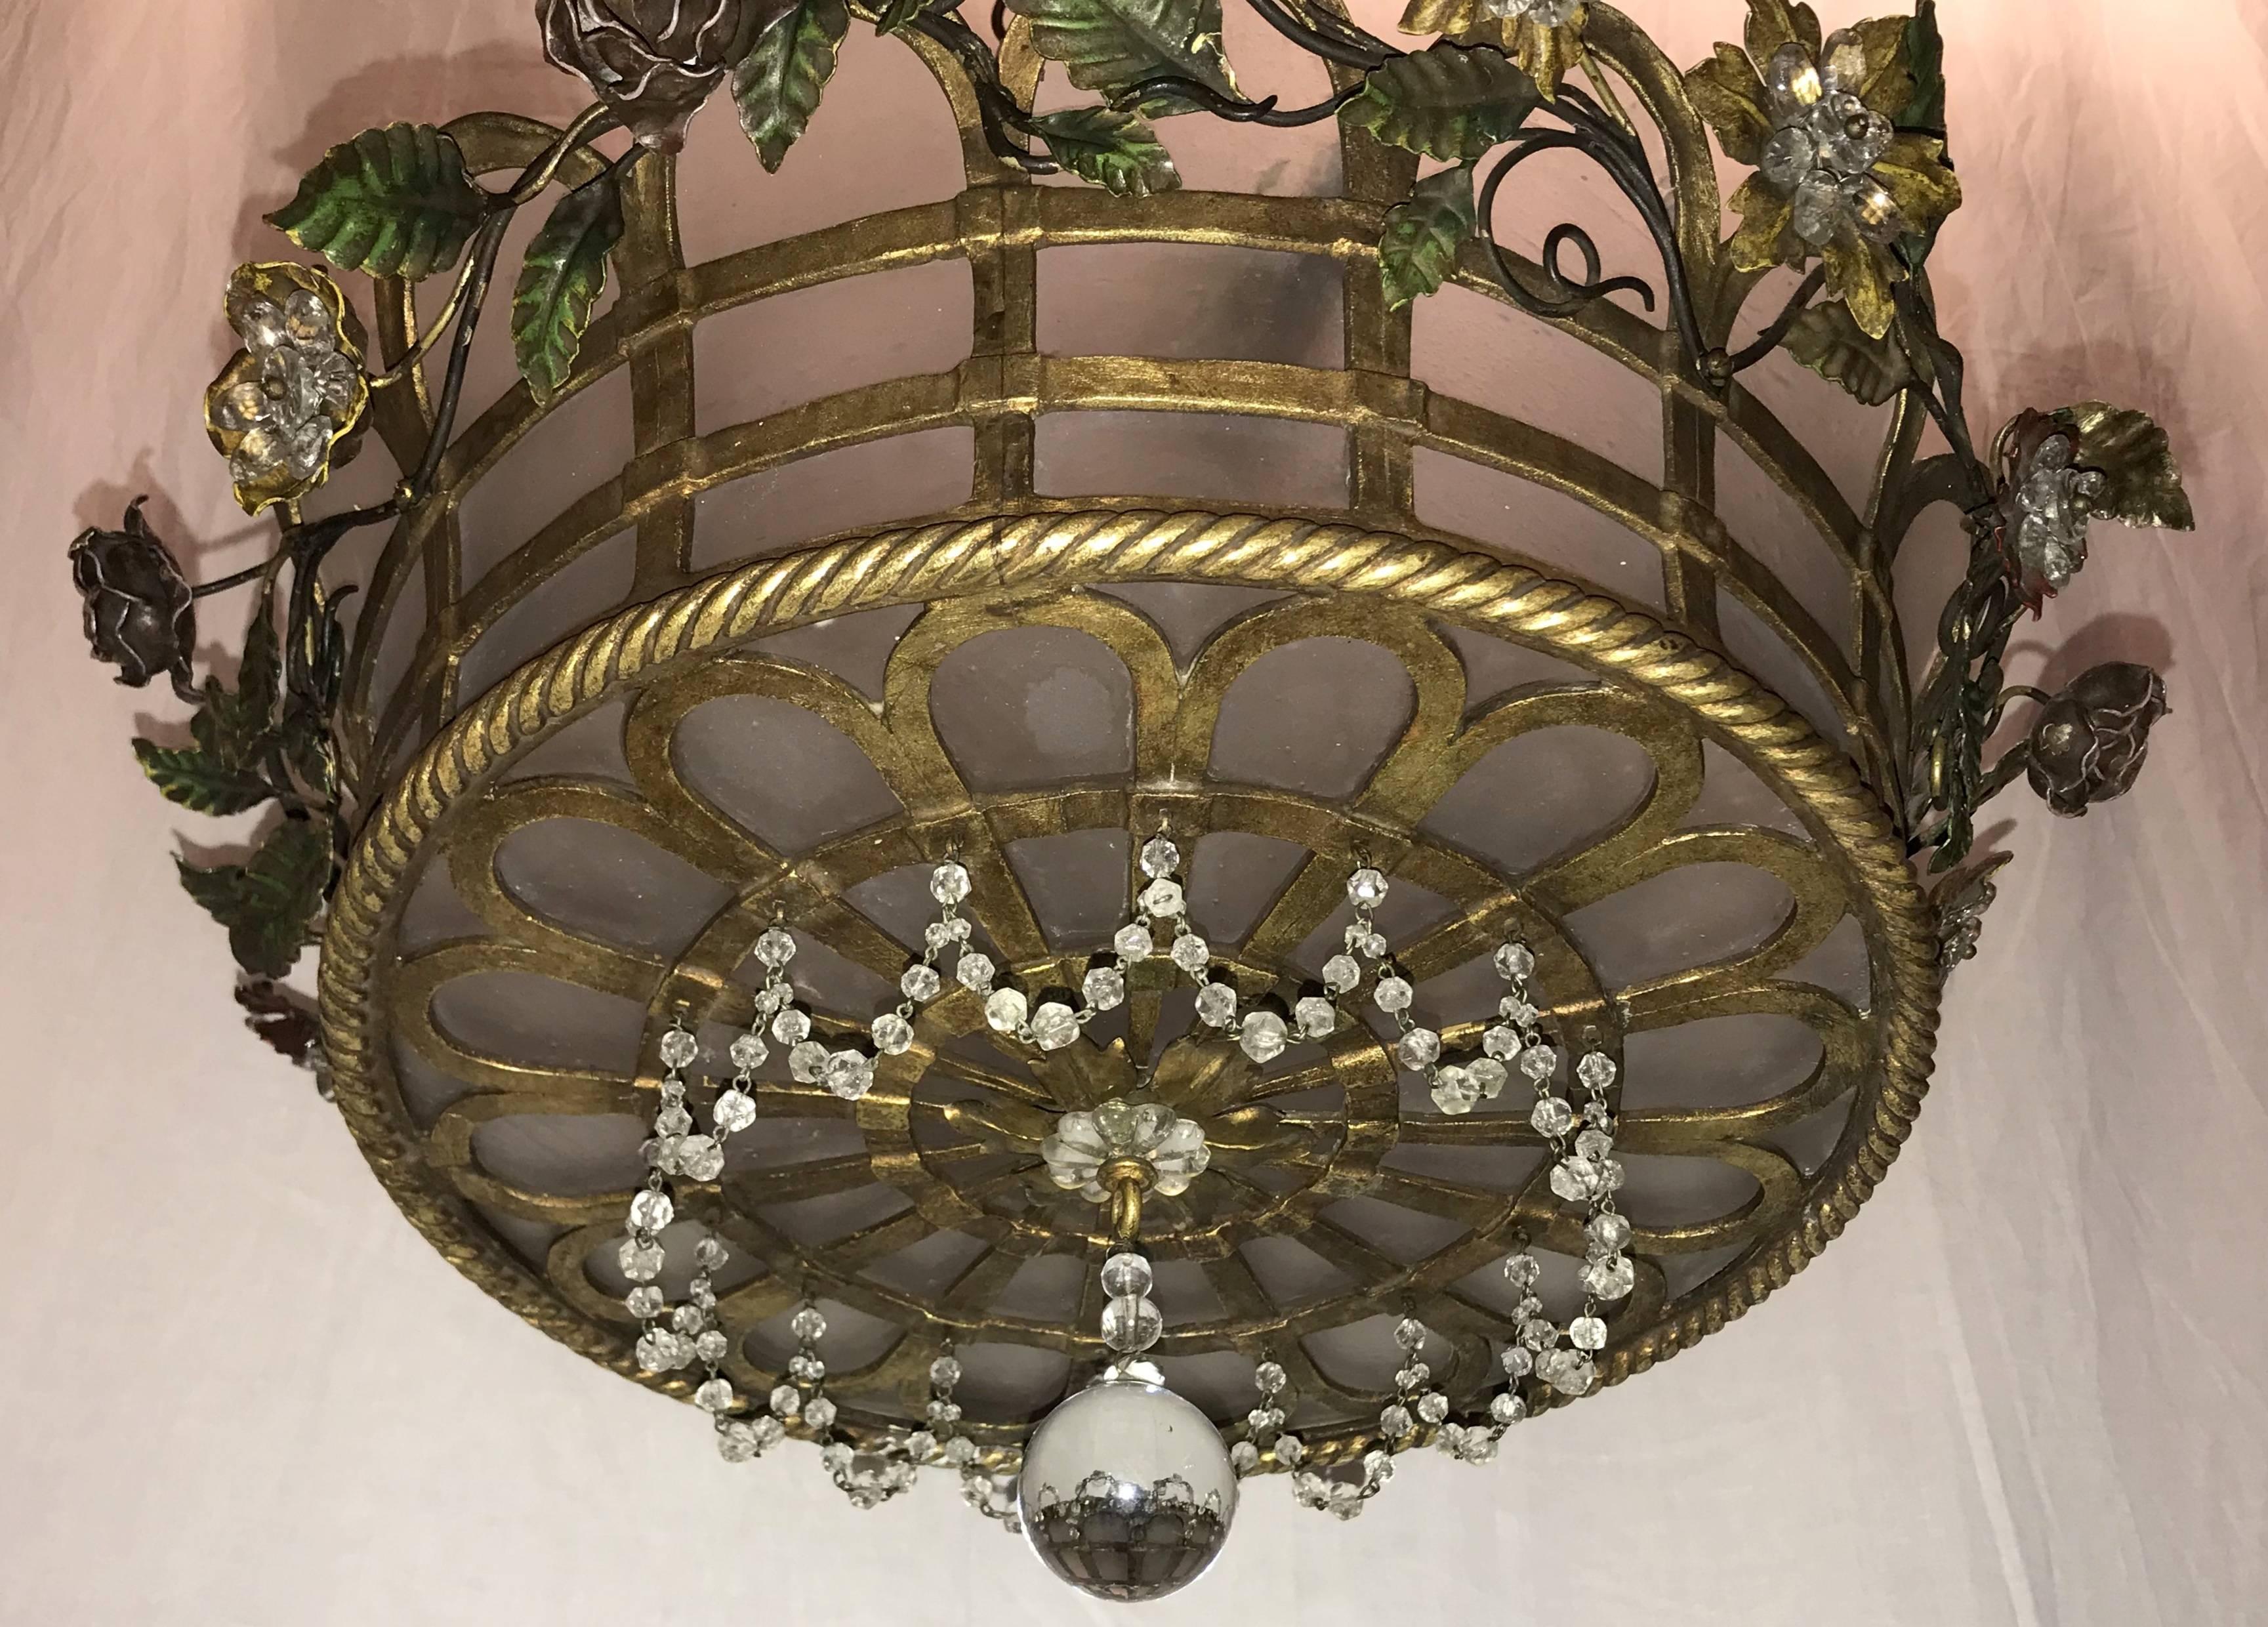 A wonderful French bronze and frosted glass insert with beaded flower and swags, woven basket form chandelier with three internal Edison light fixture.
Height is adjustable.